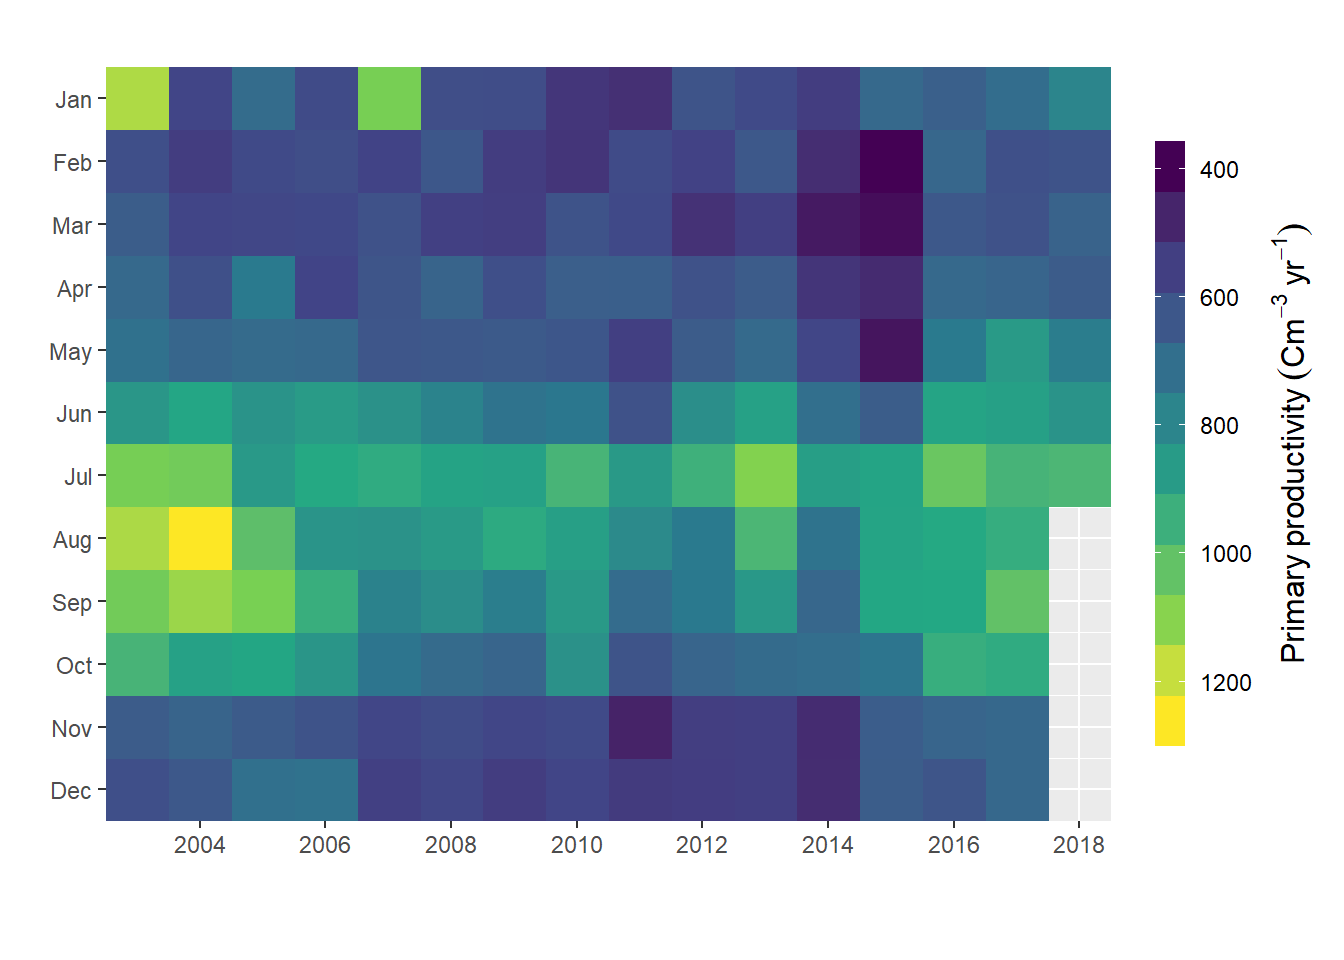 Heatmap plotted with ggplot2 package